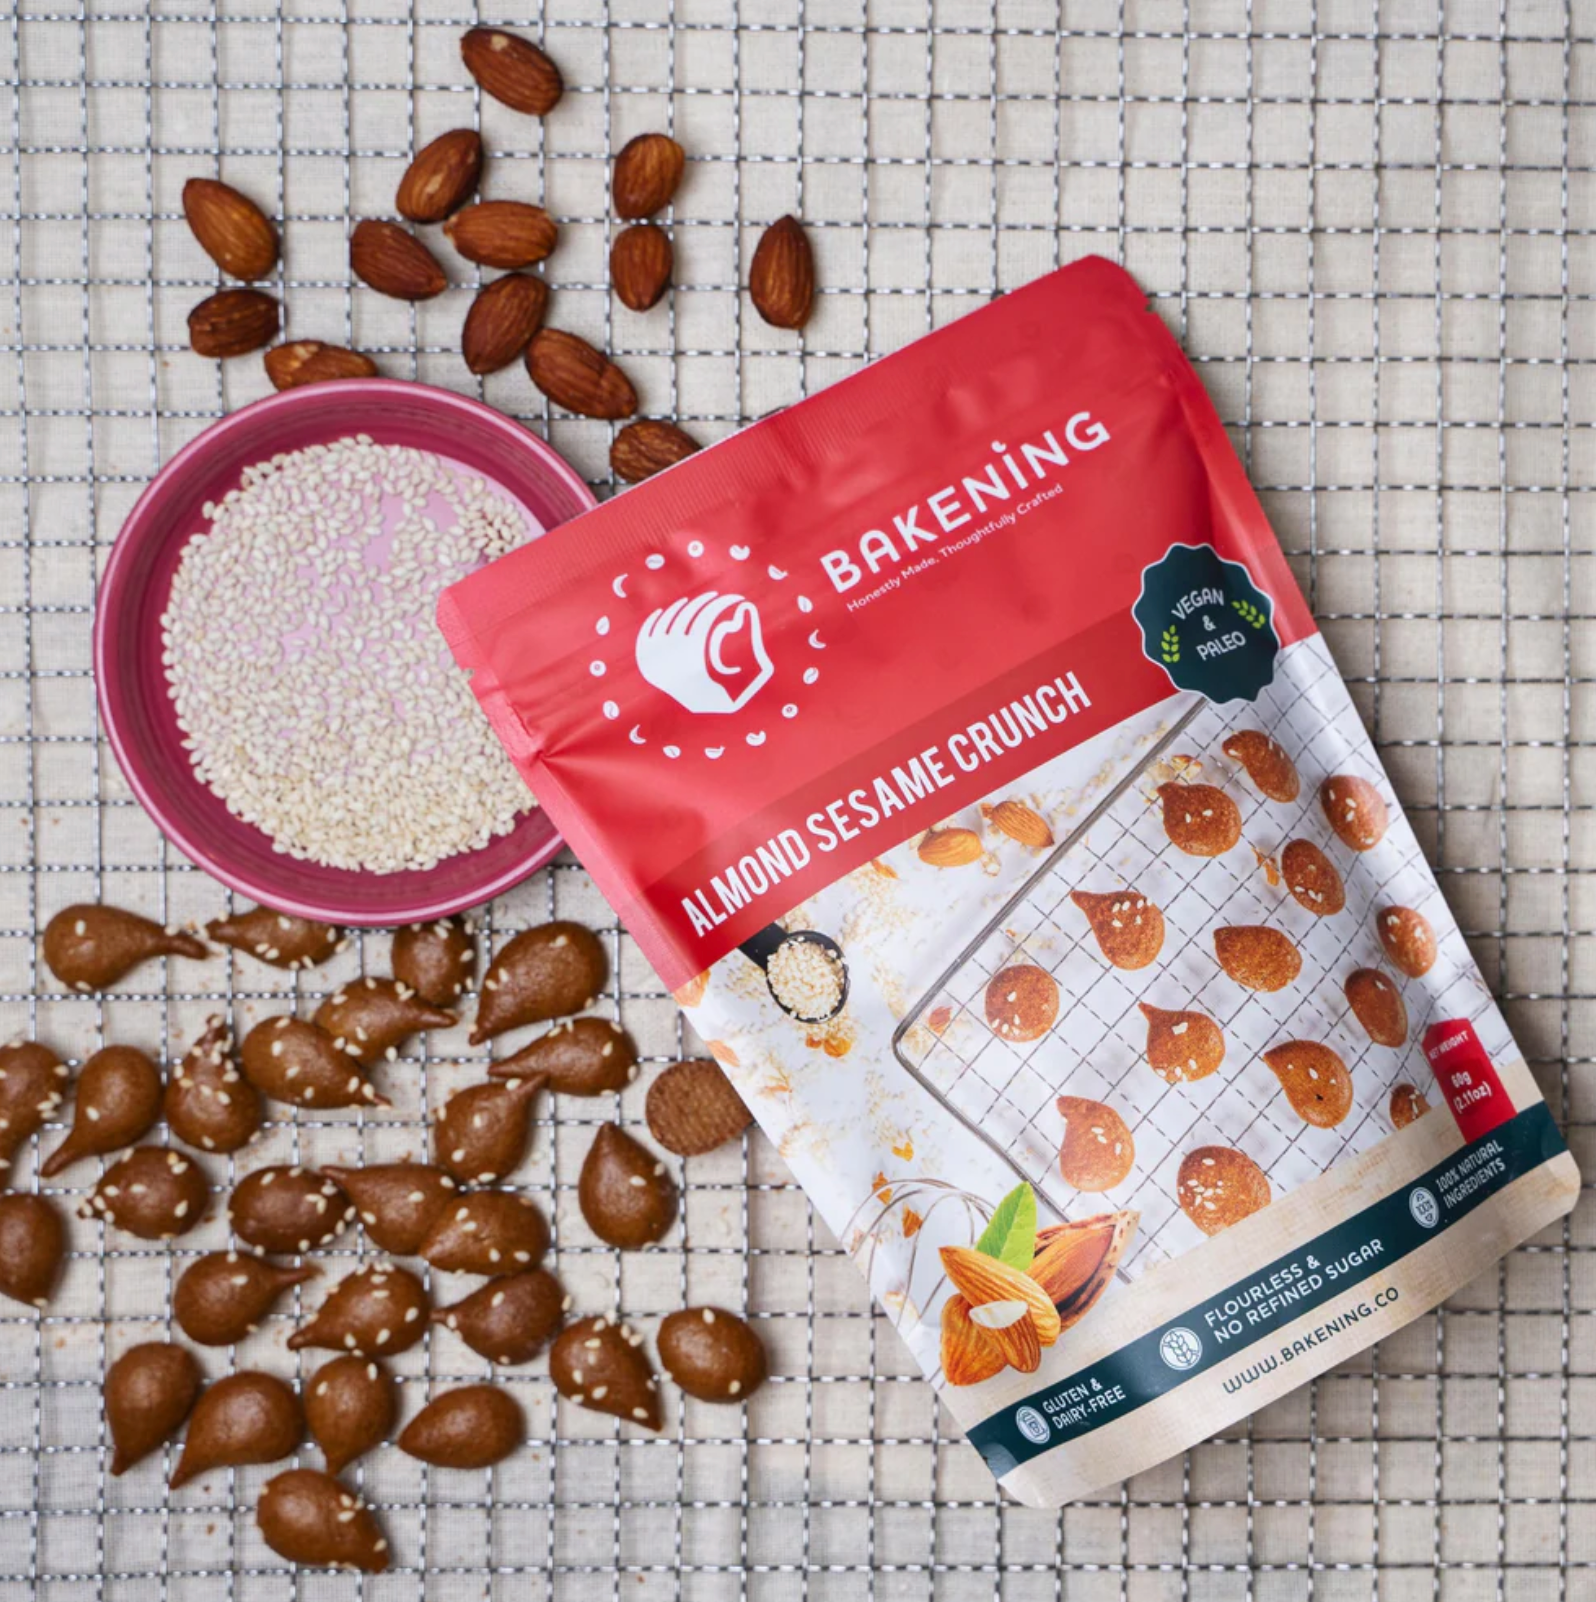 Almond Sesame Crunch by Bakening | Available at The Green Collective